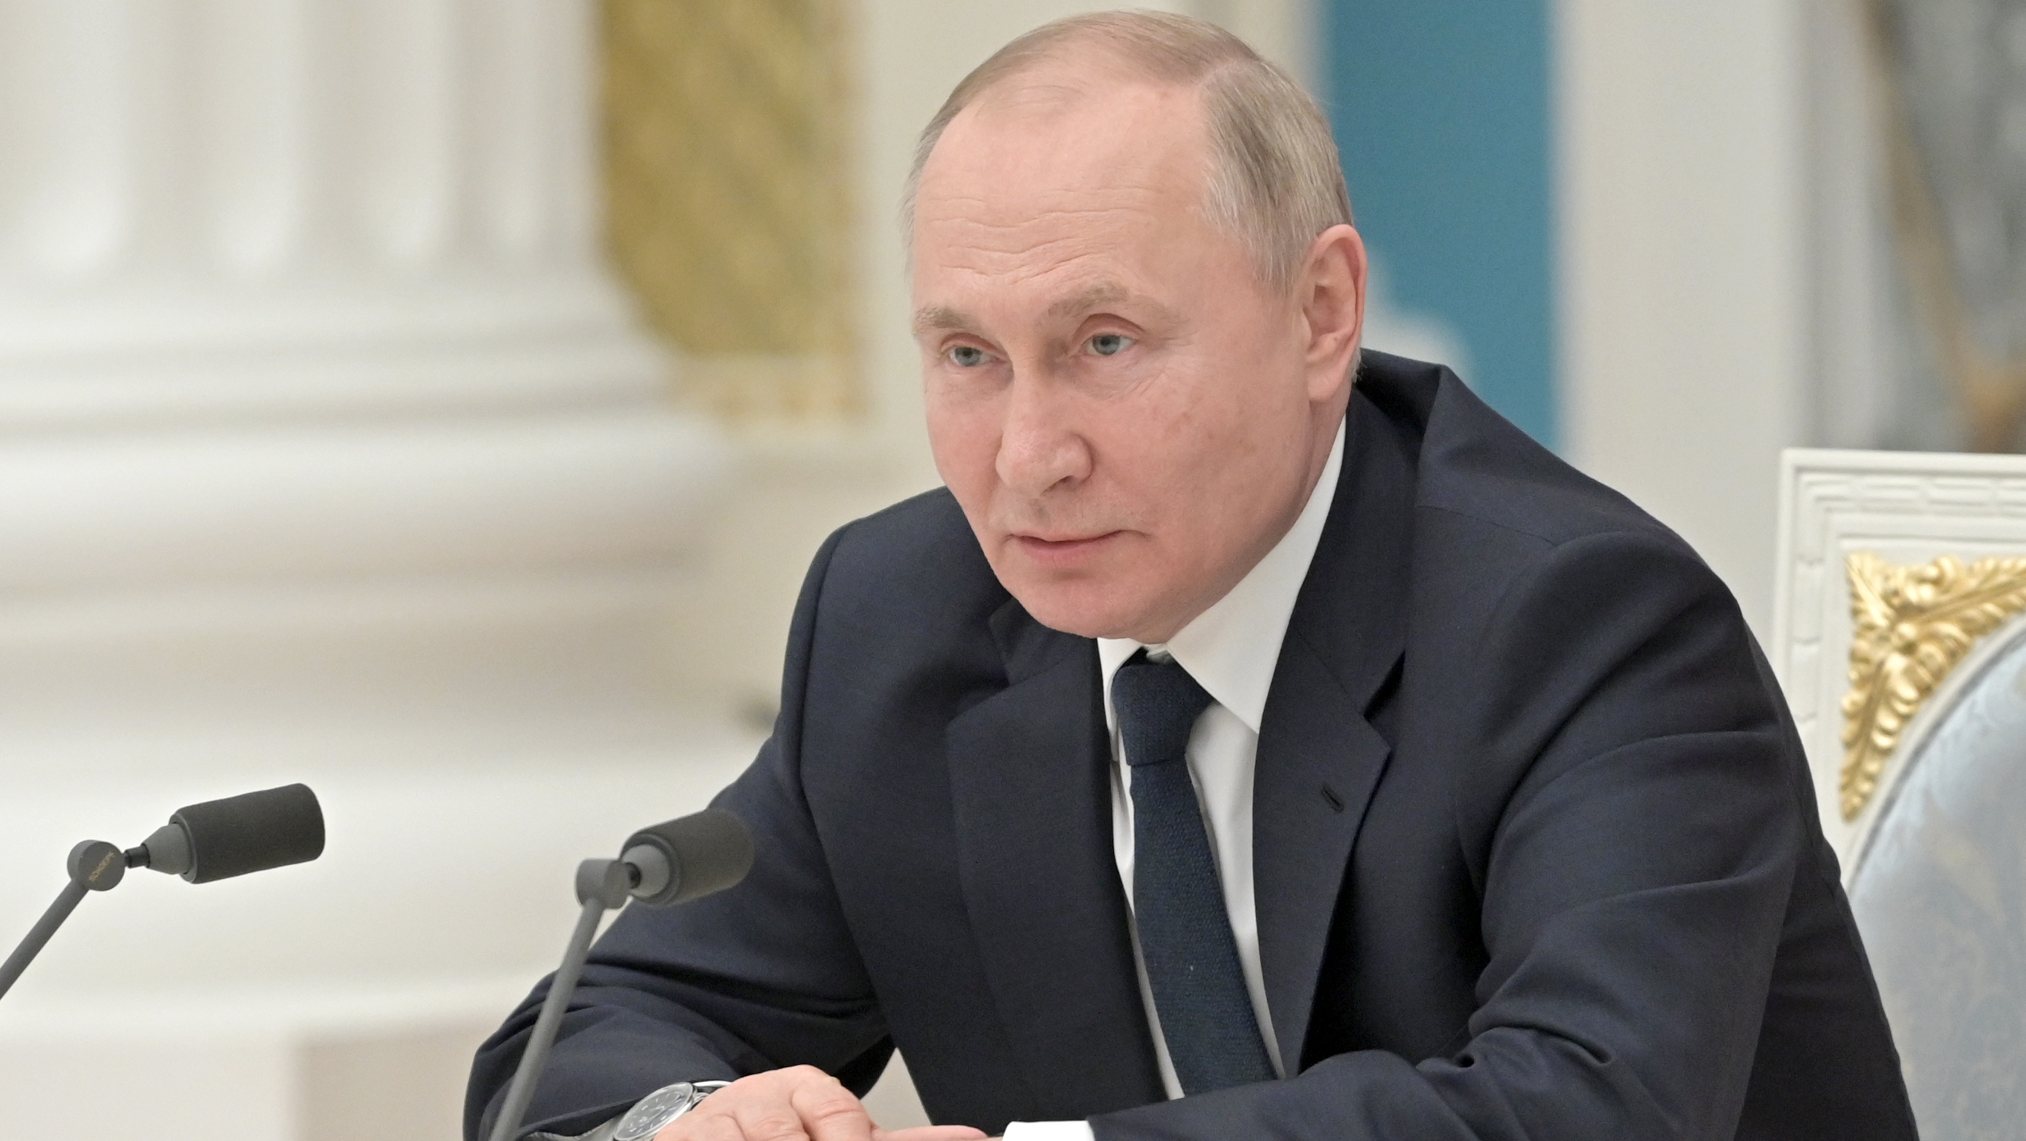 President Putin meets with Russian business leaders